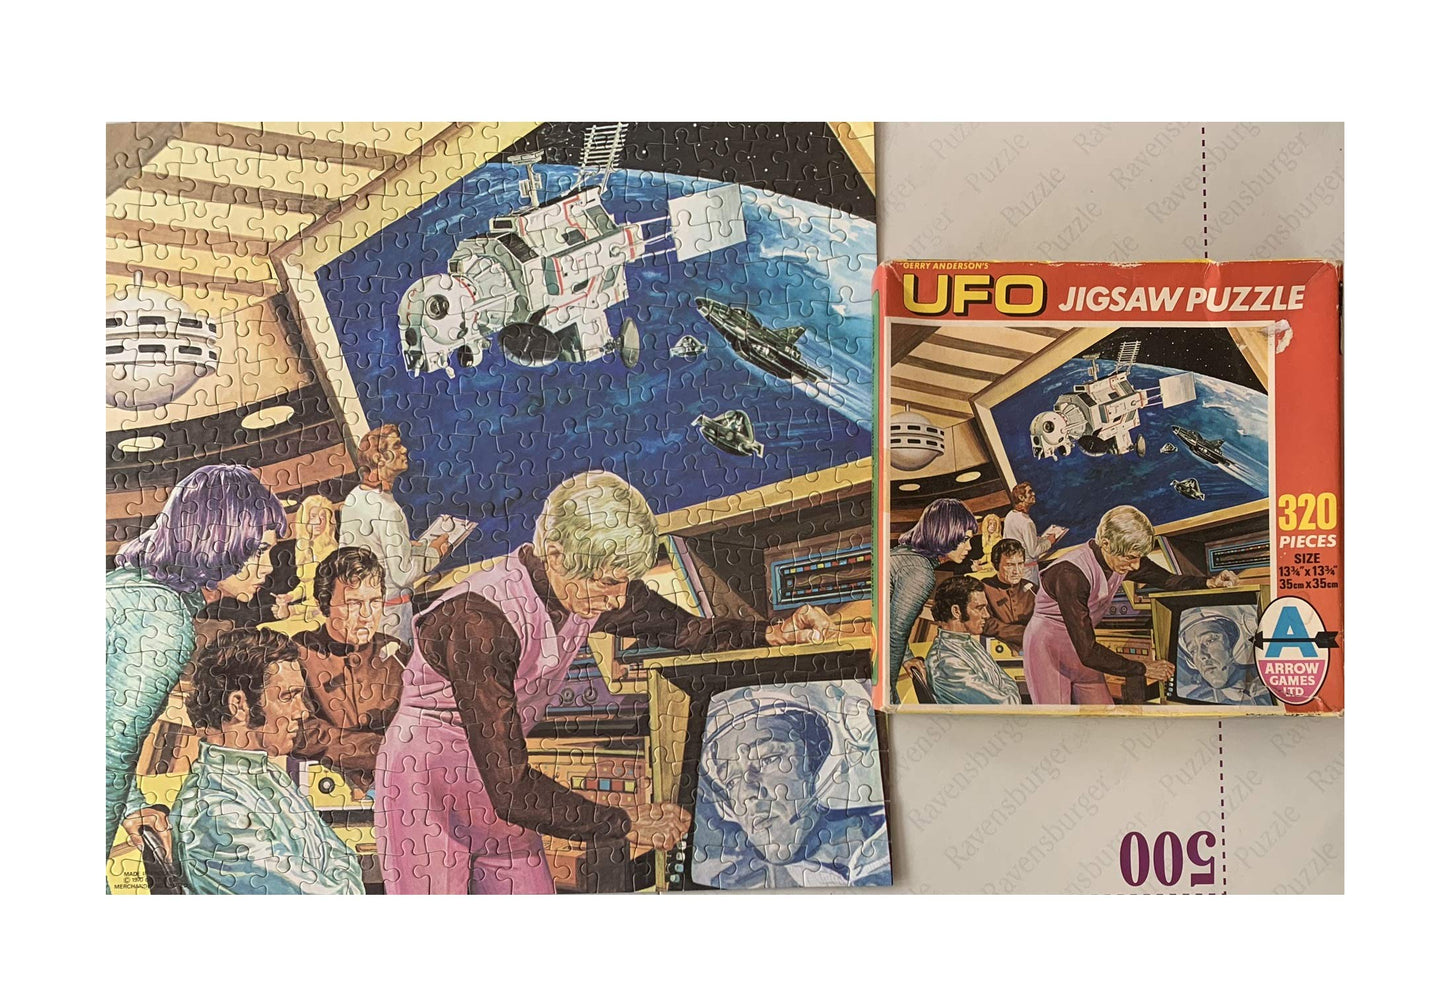 Vintage Gerry Andersons Arrow Games Ltd 1970 UFO 320 Piece Jigsaw Puzzle No. 2316 The Control Center On Moon Base In The Original Box - Shop Stock Room Find